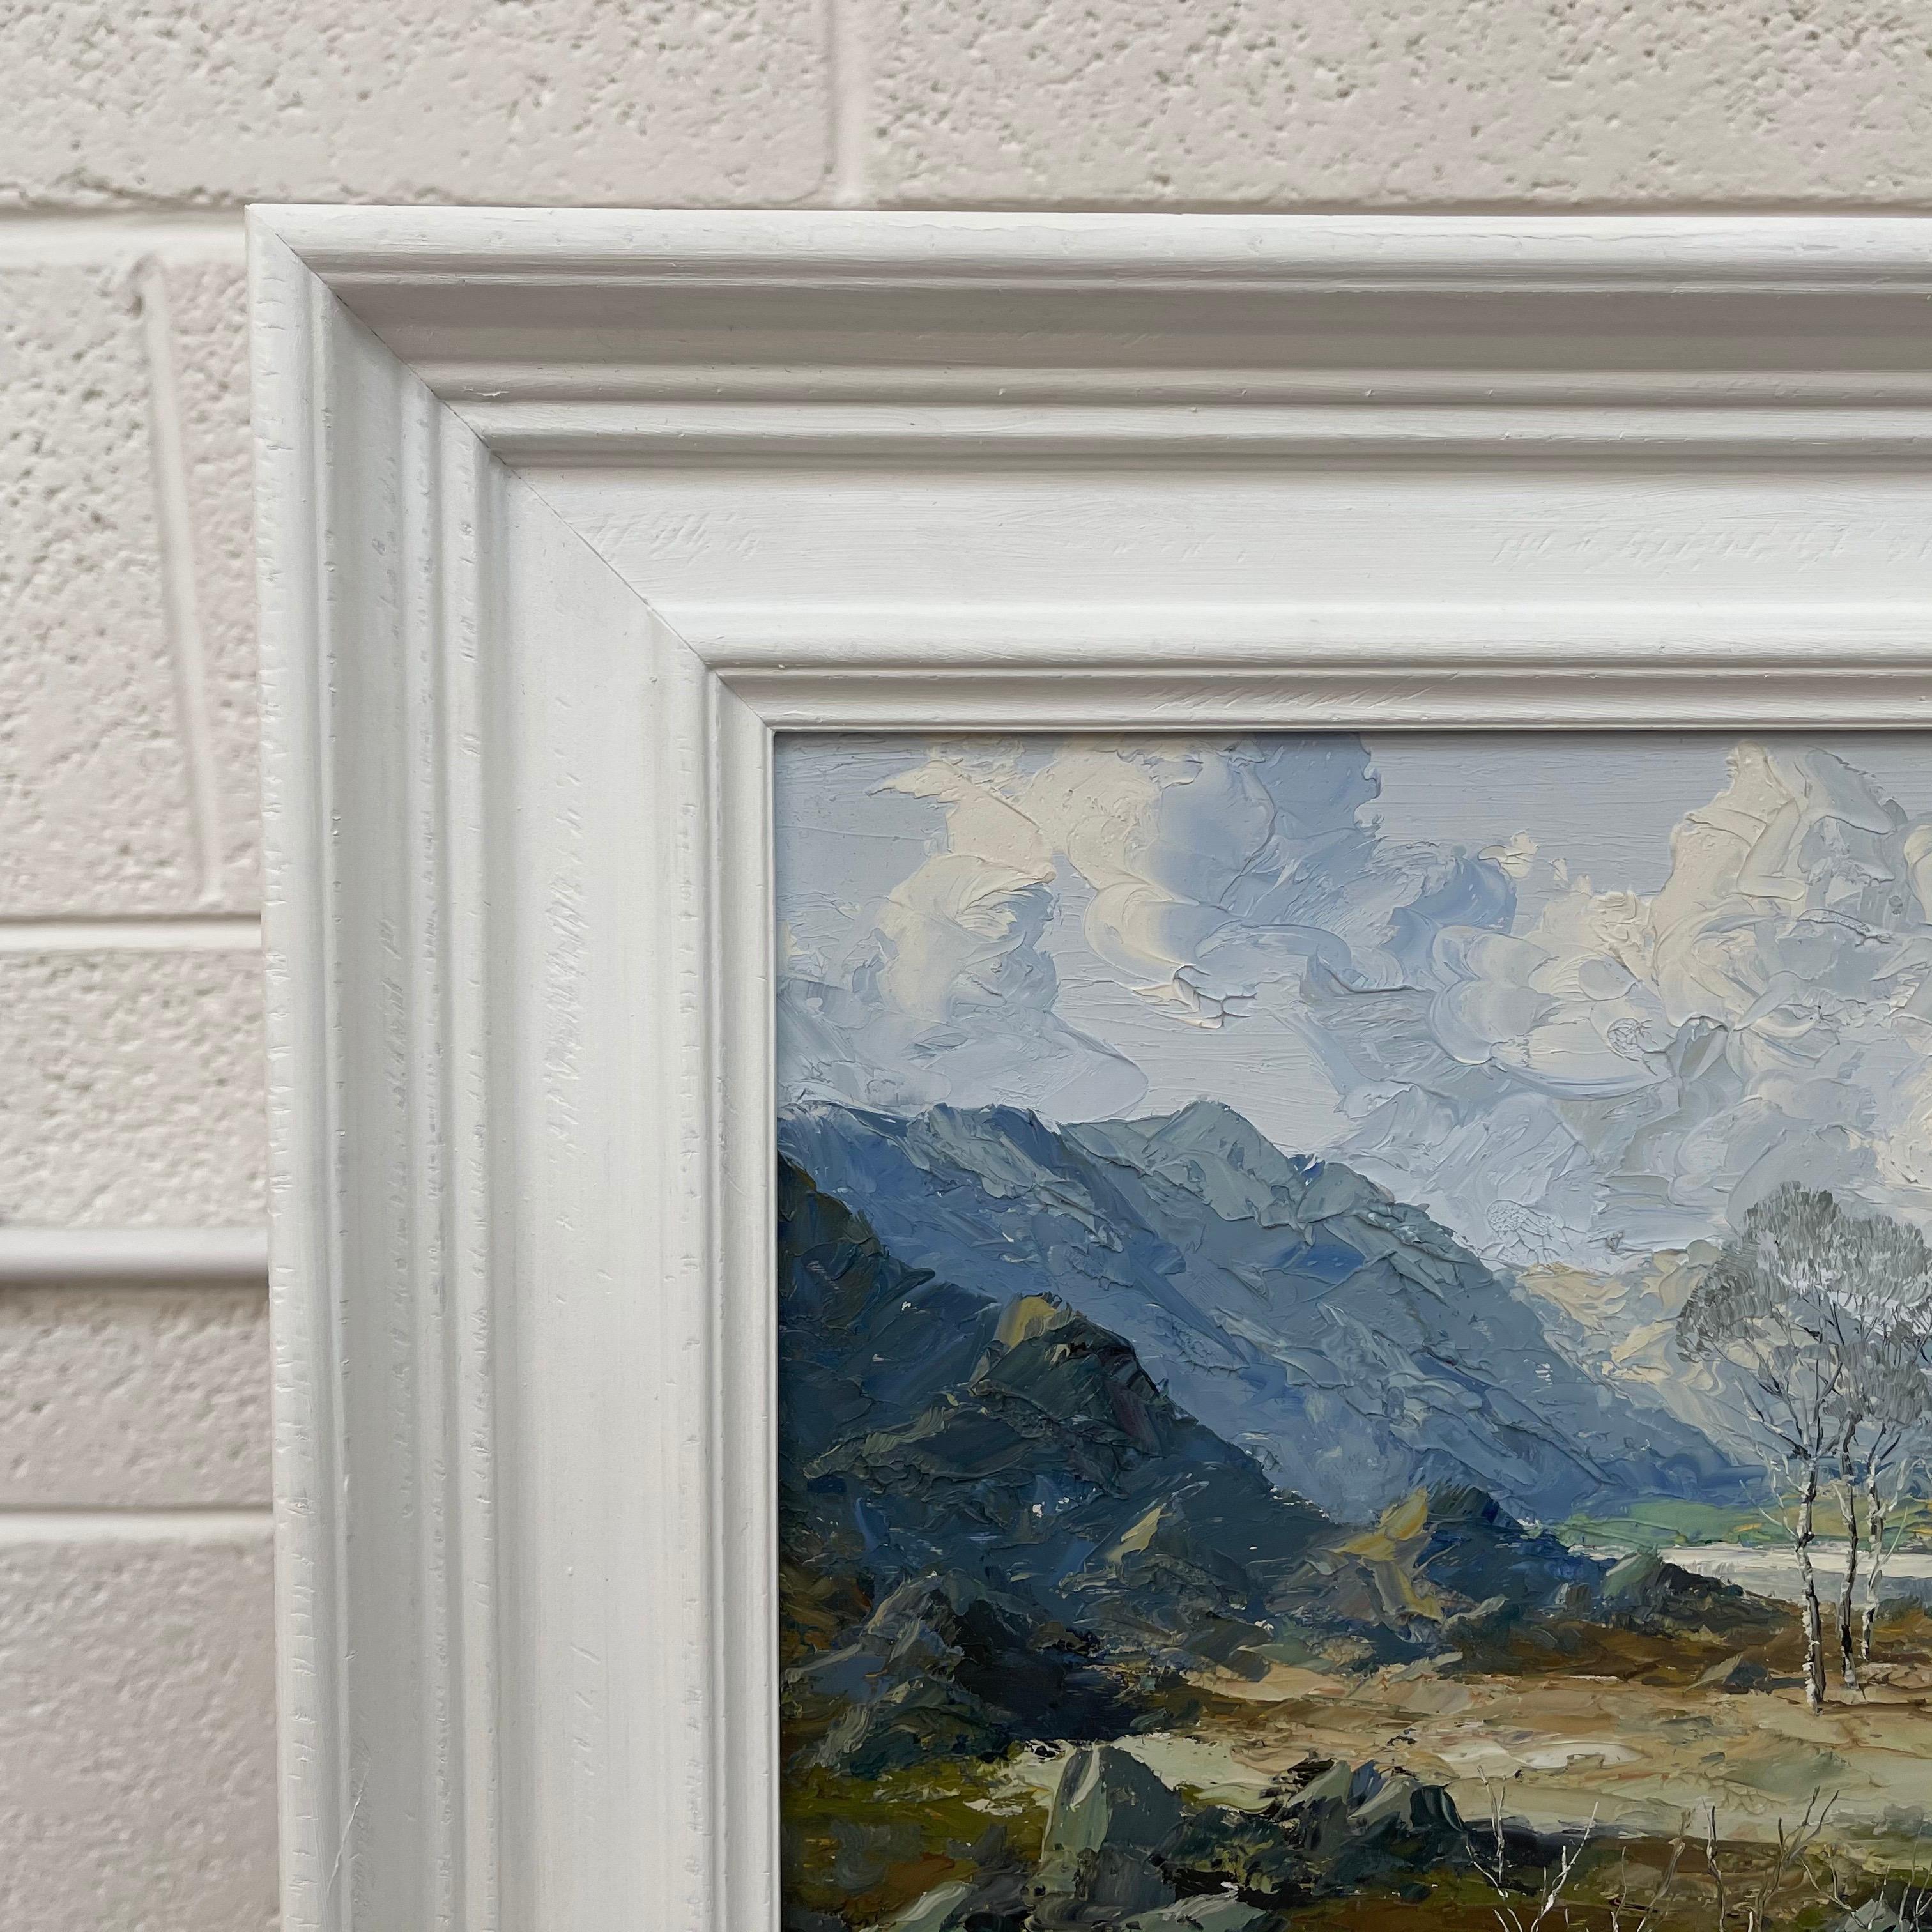 Impasto Oil Painting of River Mountain Scene in Wales by British Artist

Art measures 21 x 9 inches 
Frame measures 26 x 14 inches 

Charles Wyatt Warren (1908-1993) was a self-taught painter and an enthusiastic supporter of the arts in North Wales.